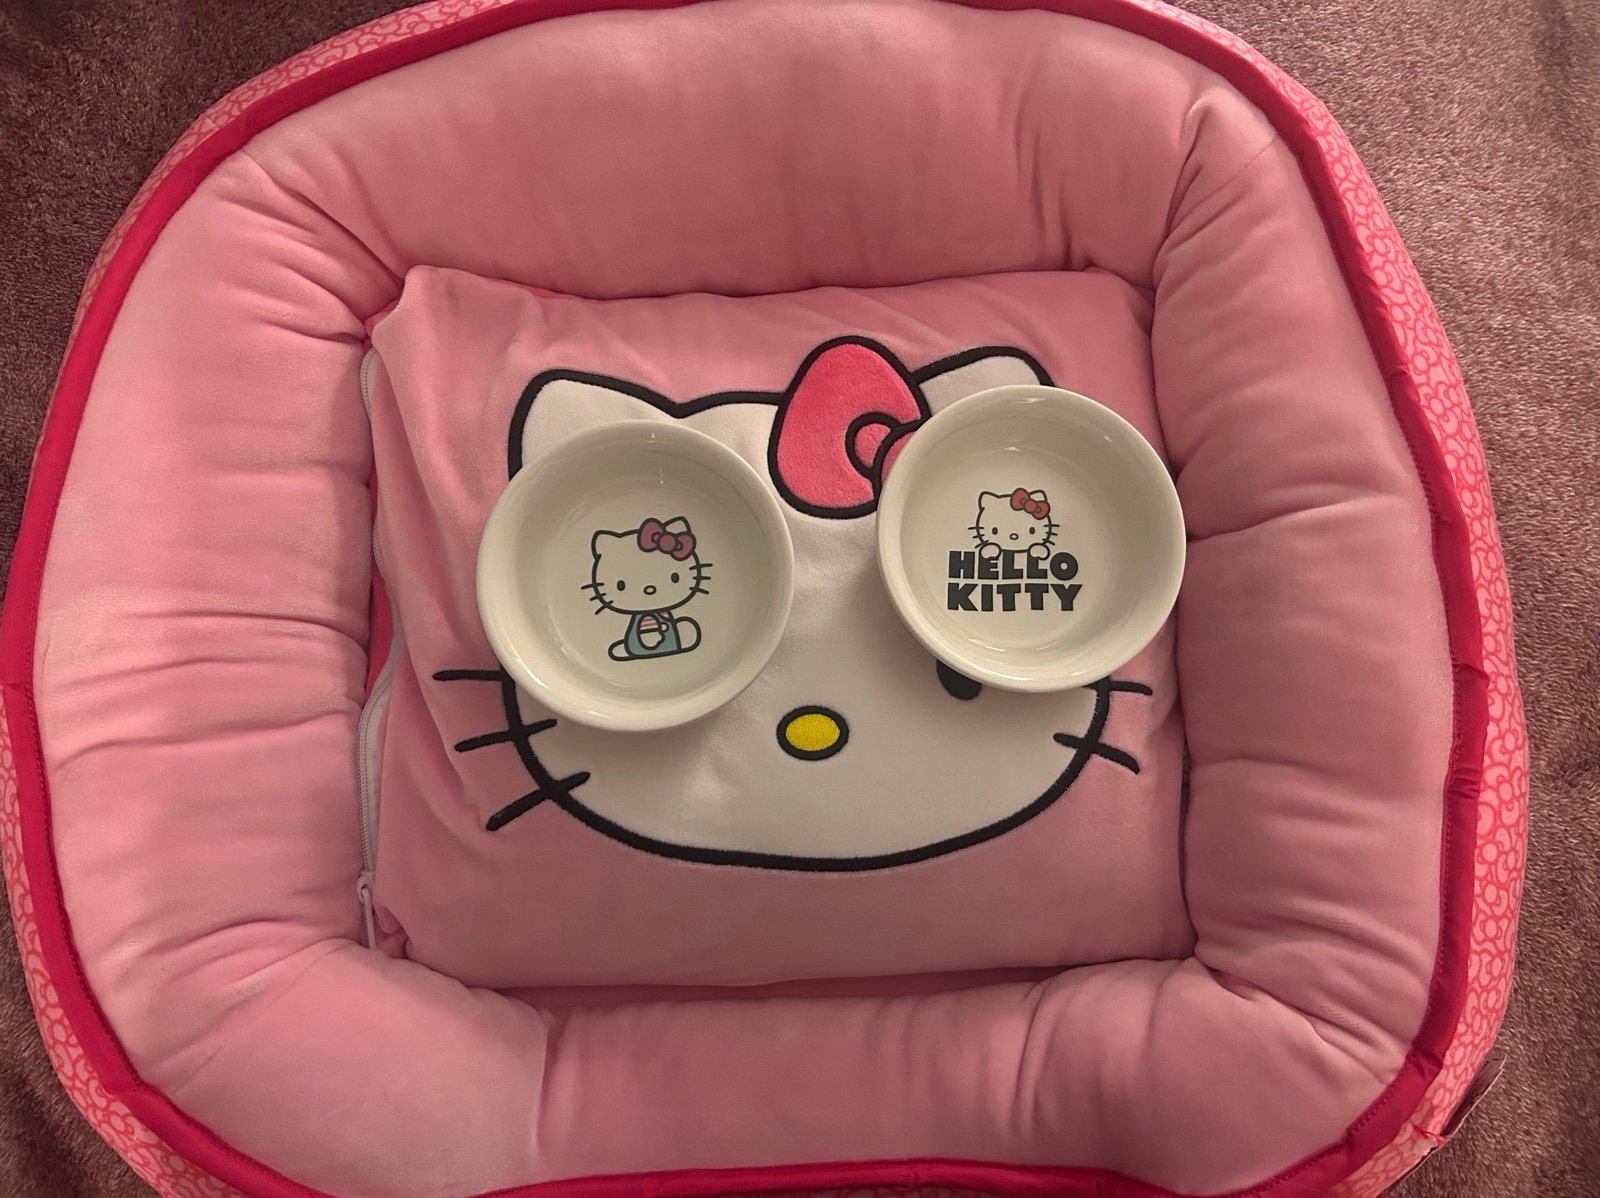 hello kitty dog bed with bowls NcaVr0kVG